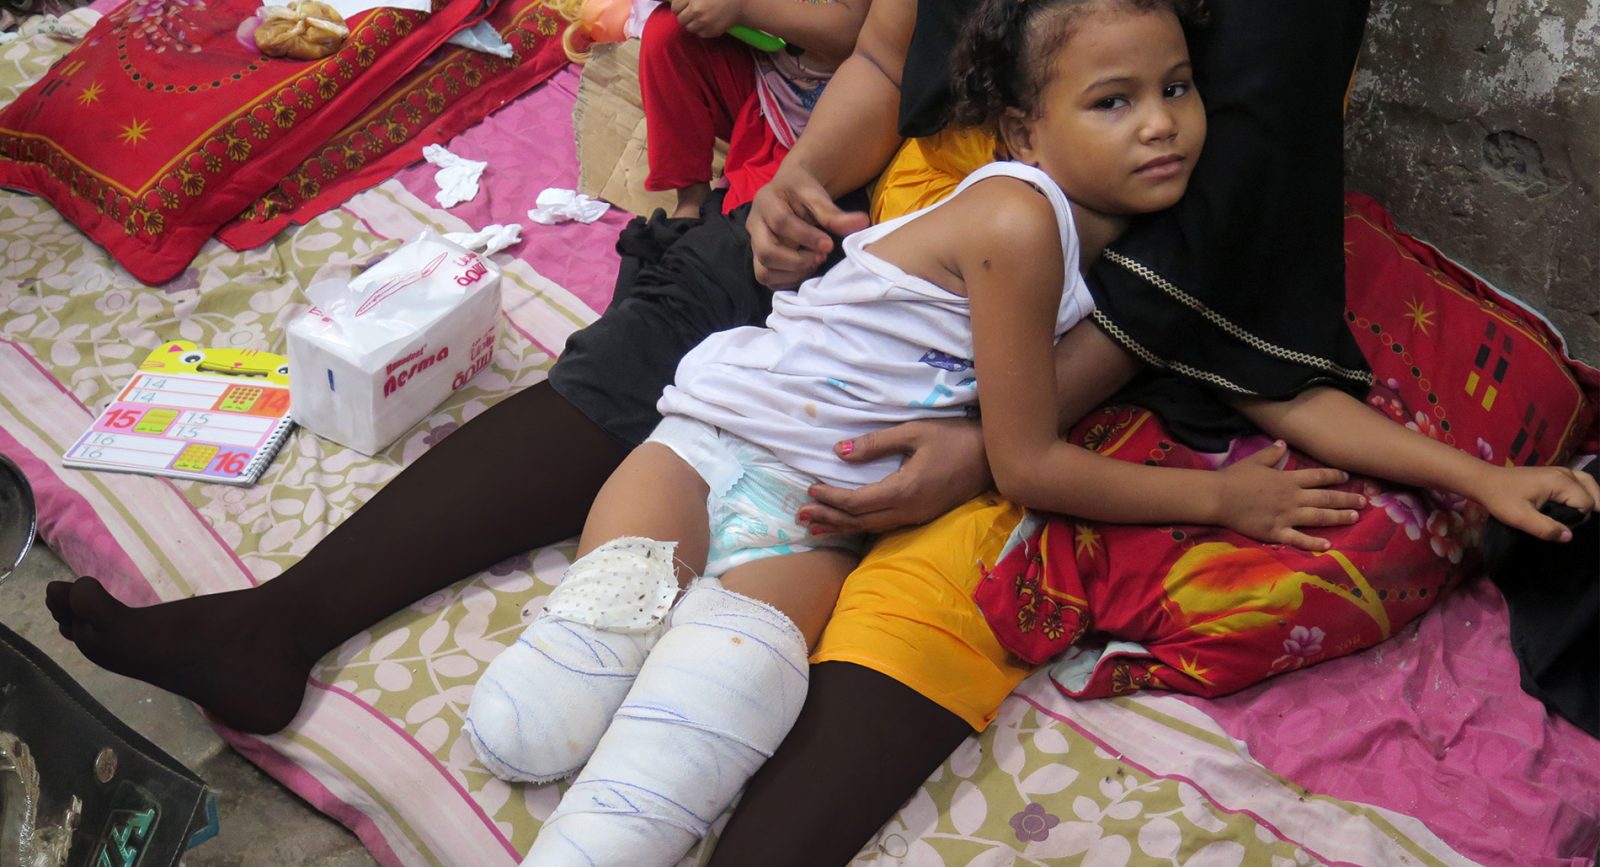 7-year-old Samia, who was injured in a bomb attack in Yemen.